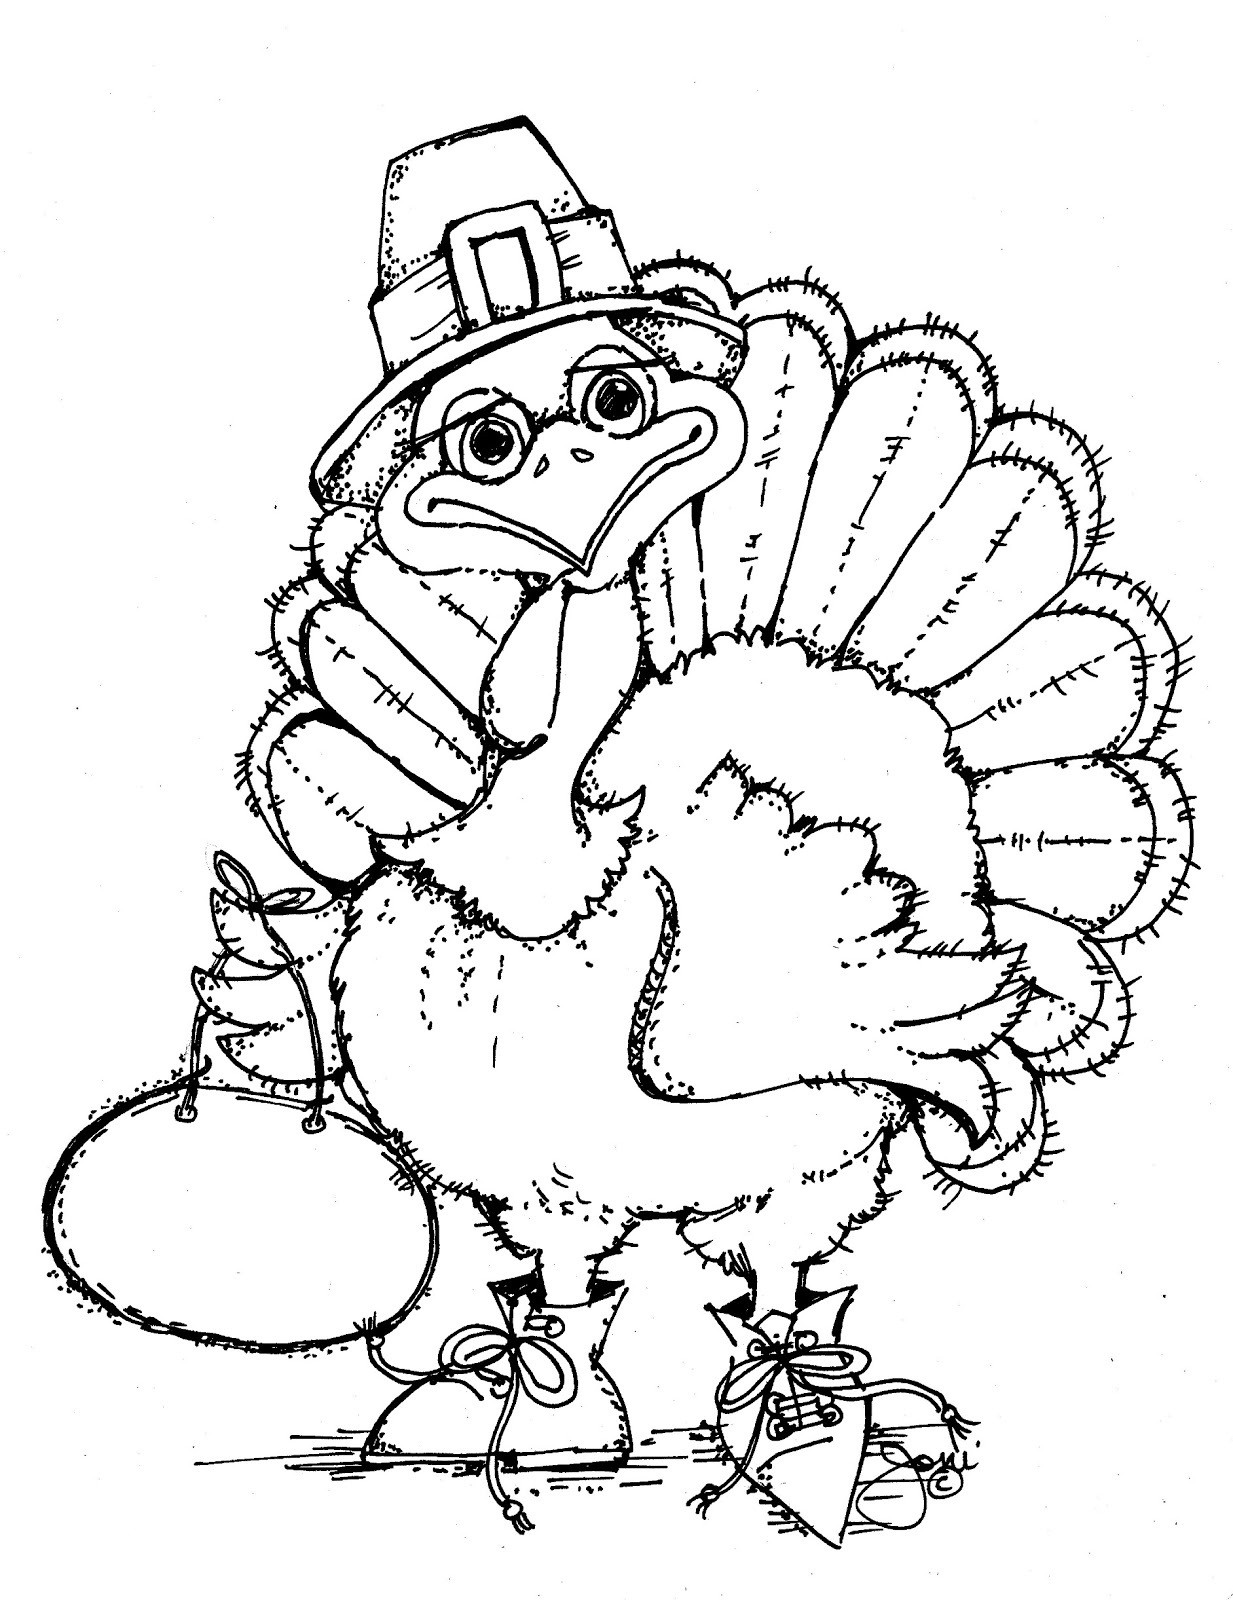 Thanksgiving Turkey Coloring Page
 Free Printable Turkey Coloring Pages For Kids